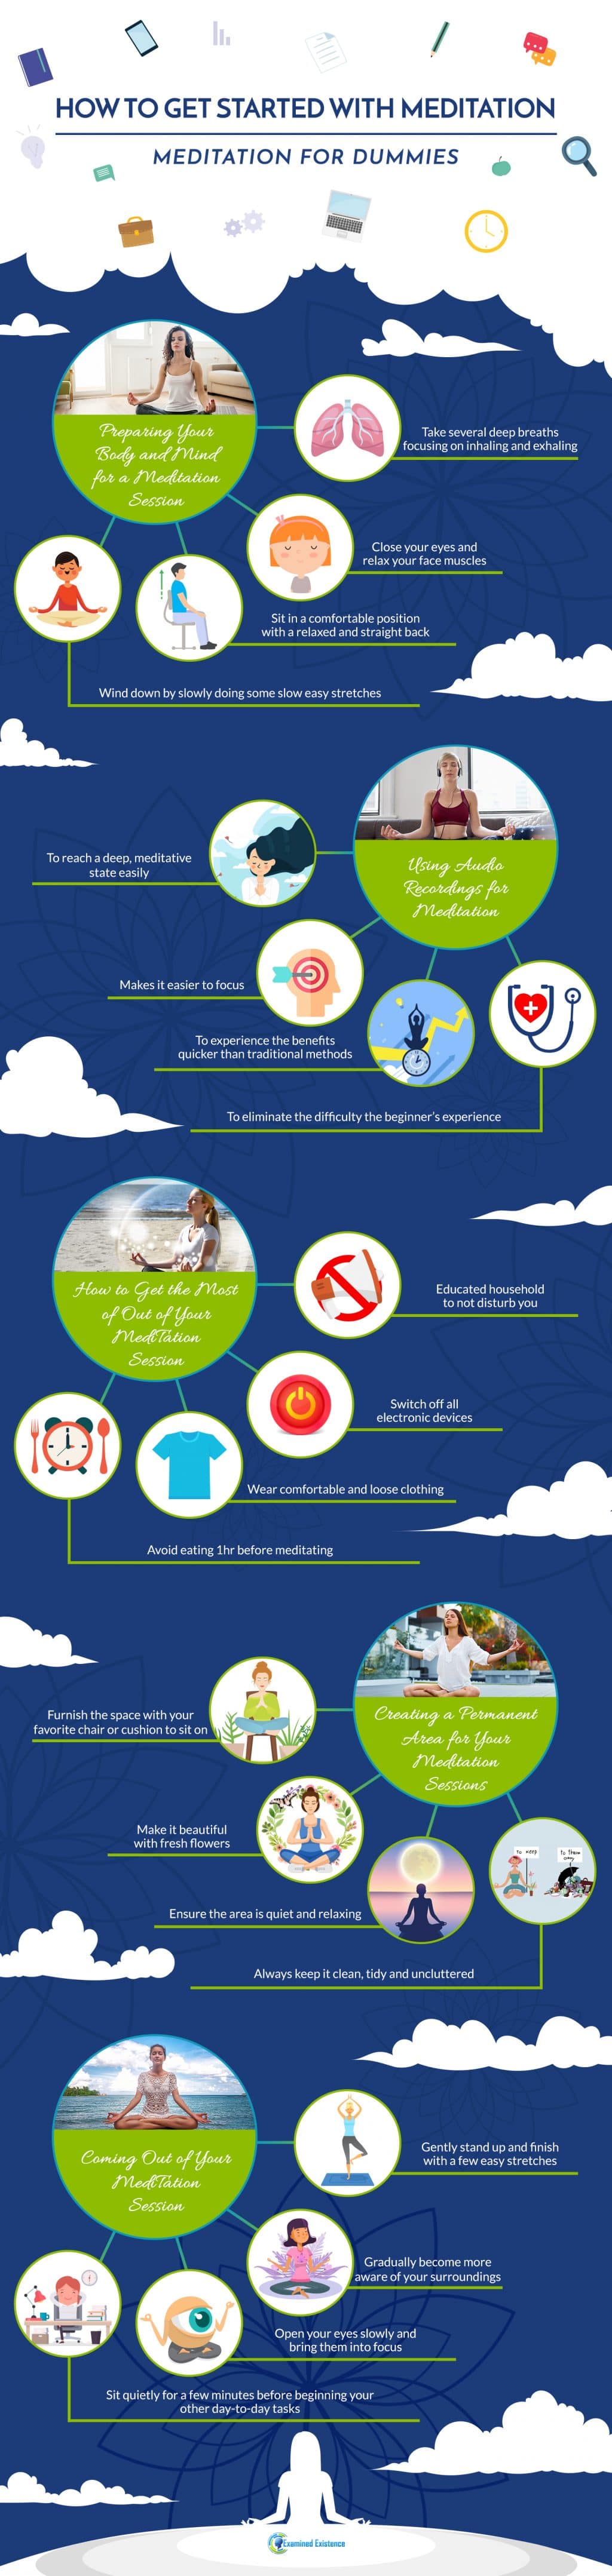 How to Get Started with Meditation Infographic